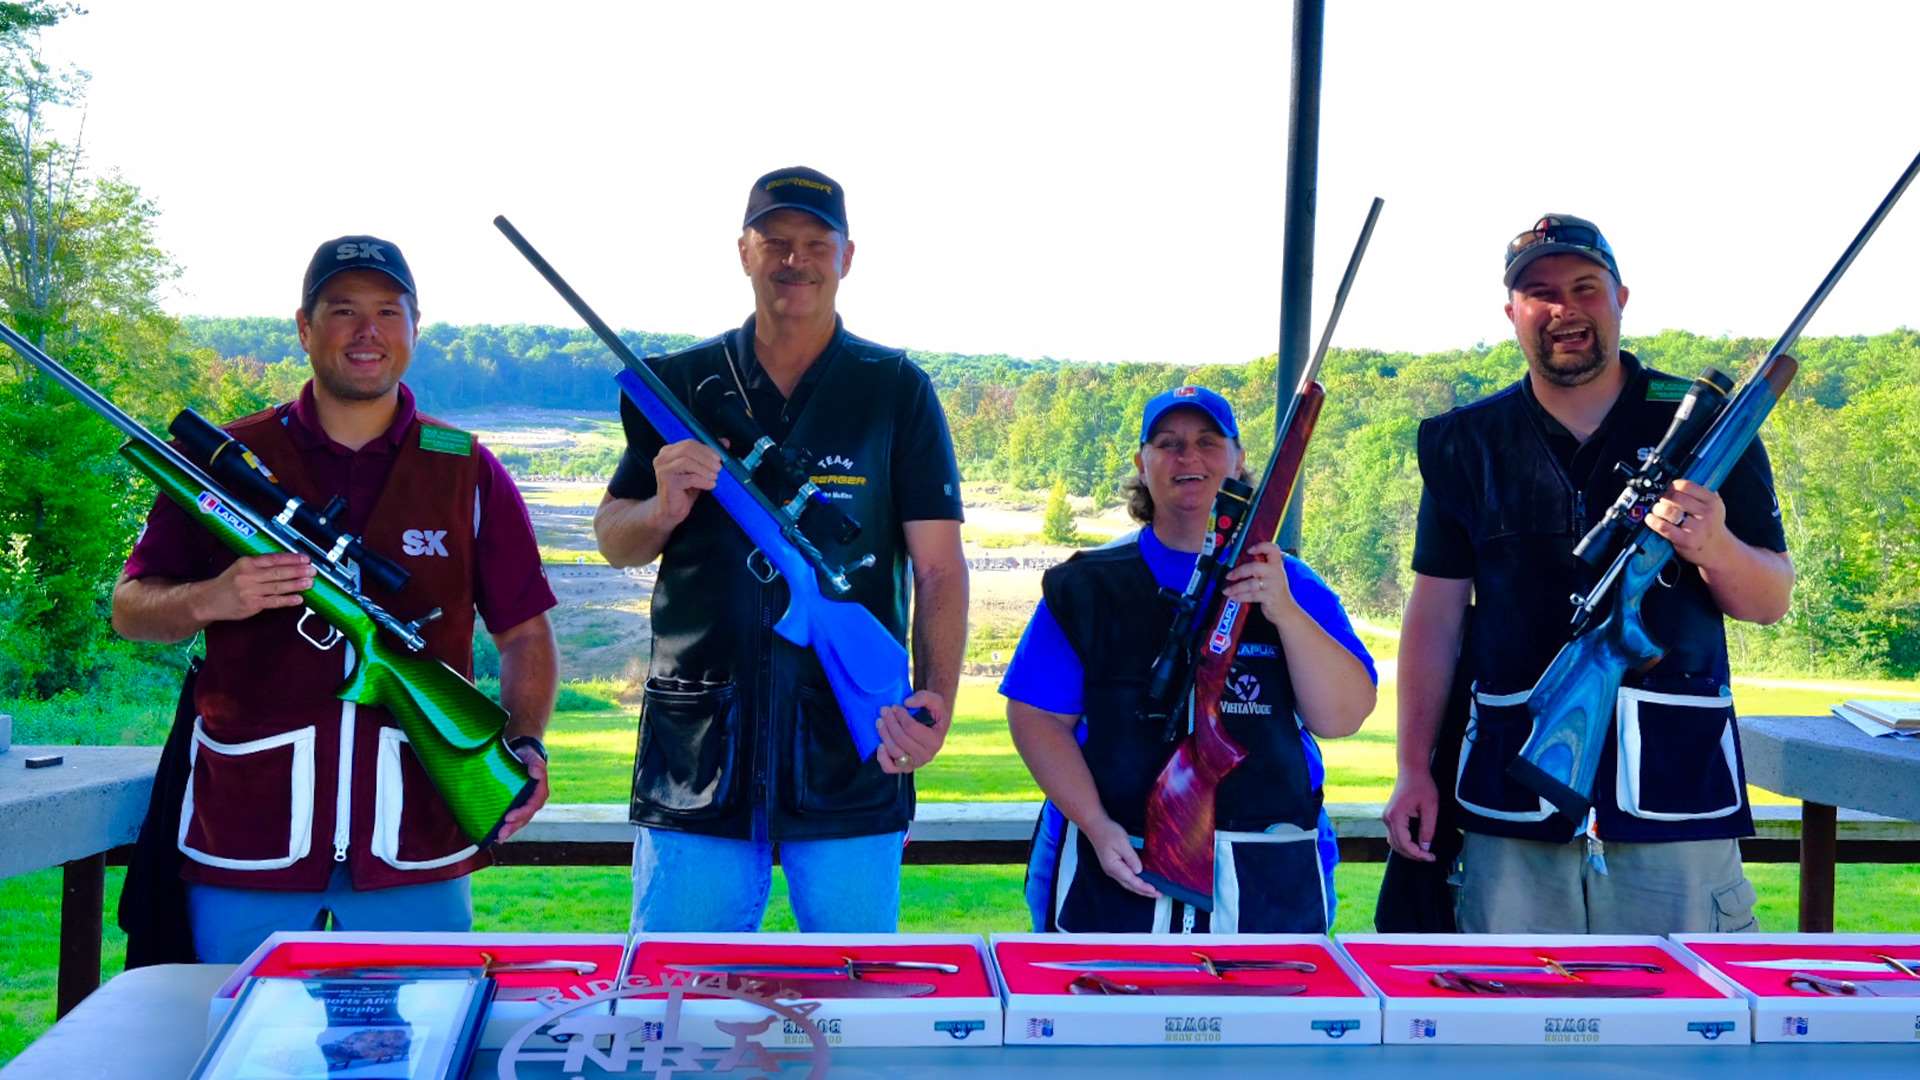 2021 NRA Silhouette Rifle Champions